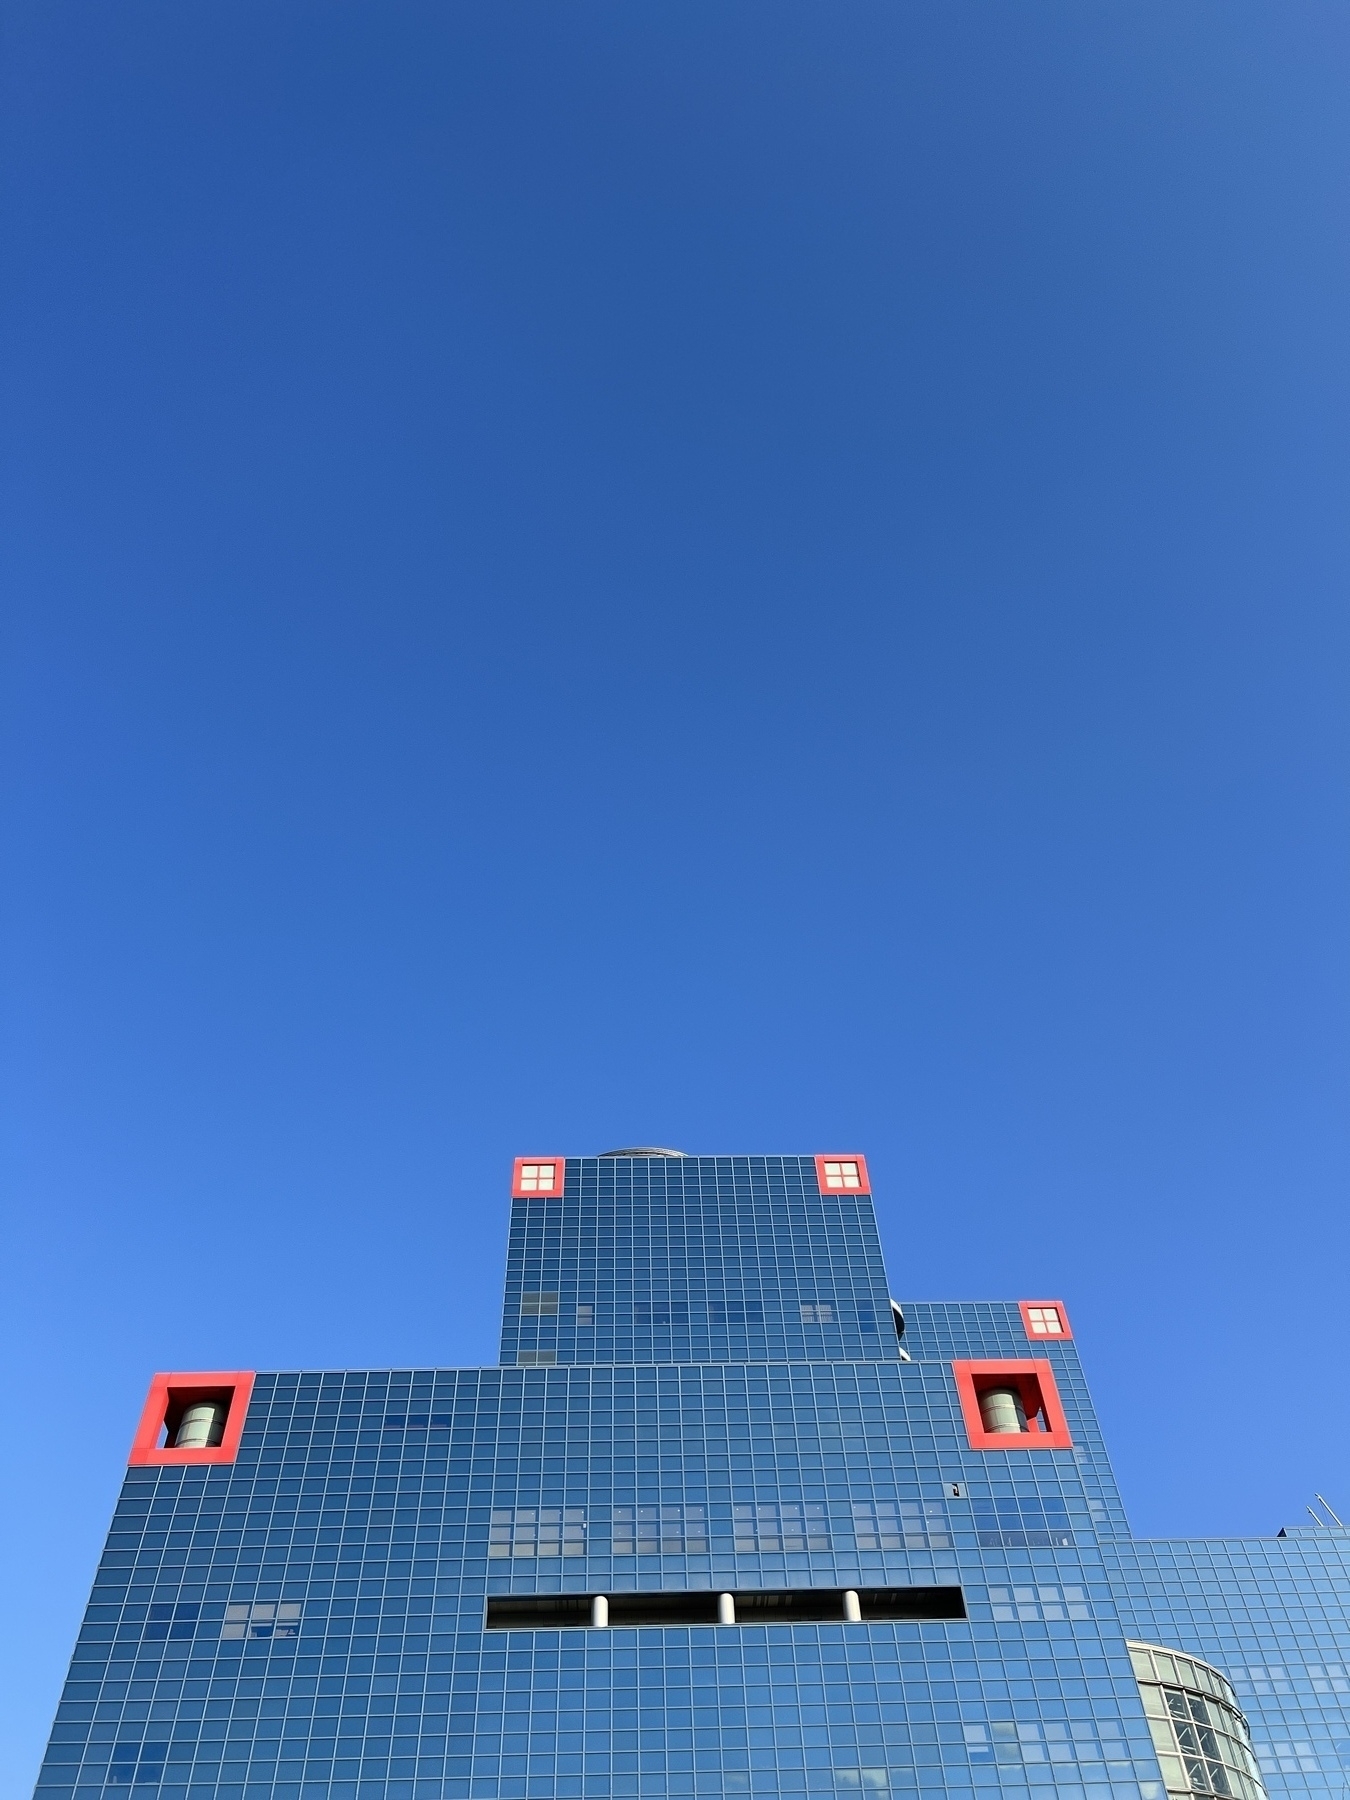 Building with blue windows nearly blending into the clear blue sky above